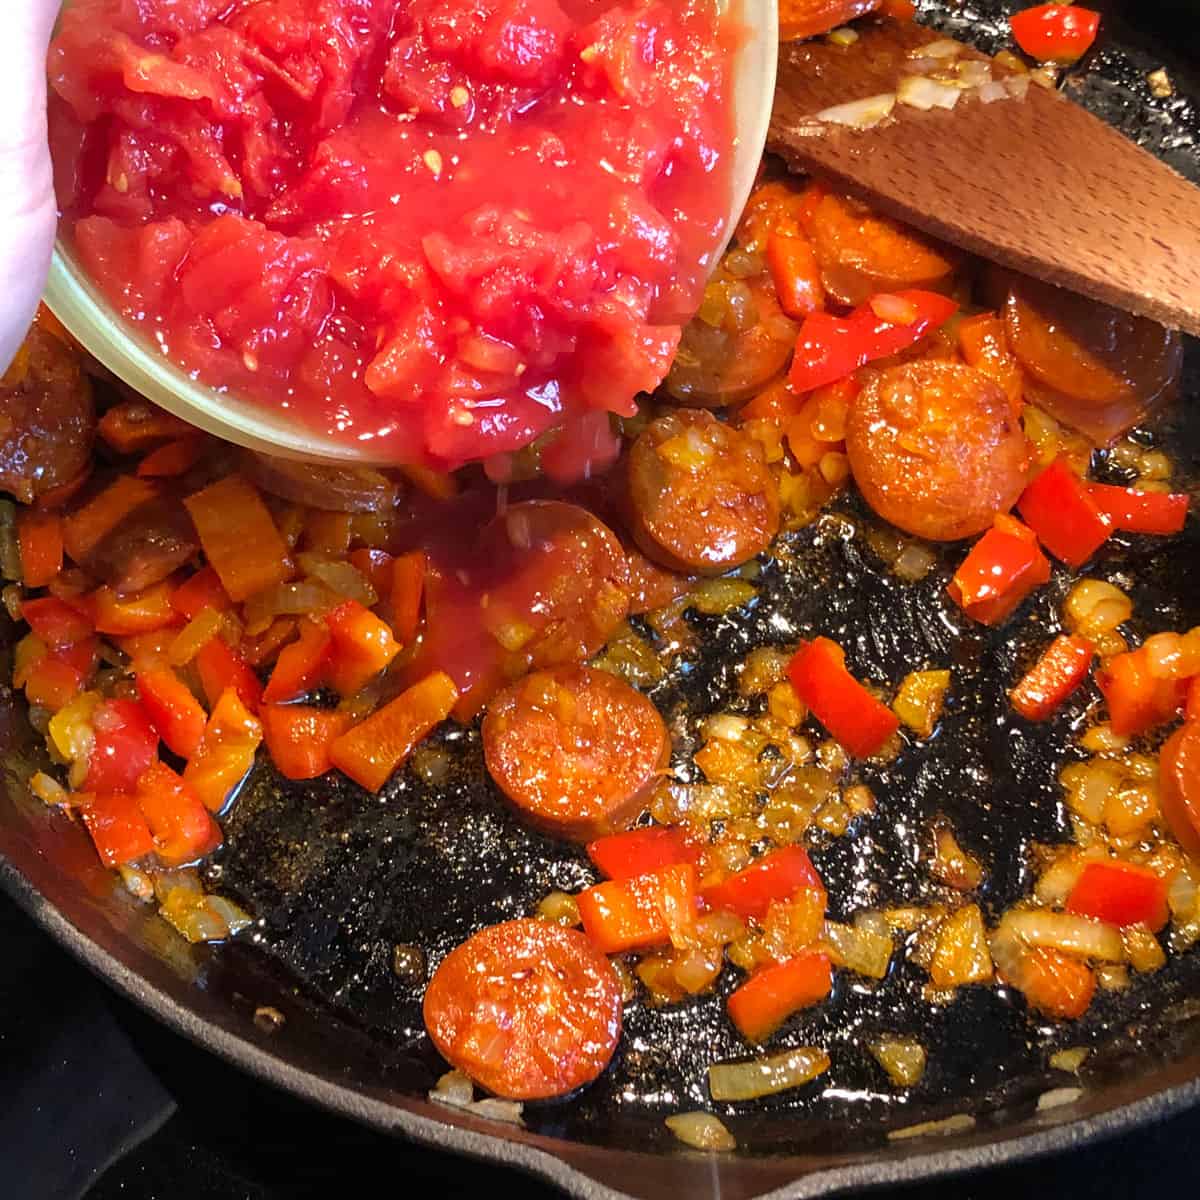 A picture of a recipe step - adding chopped tin tomatos into a fried ingredients.